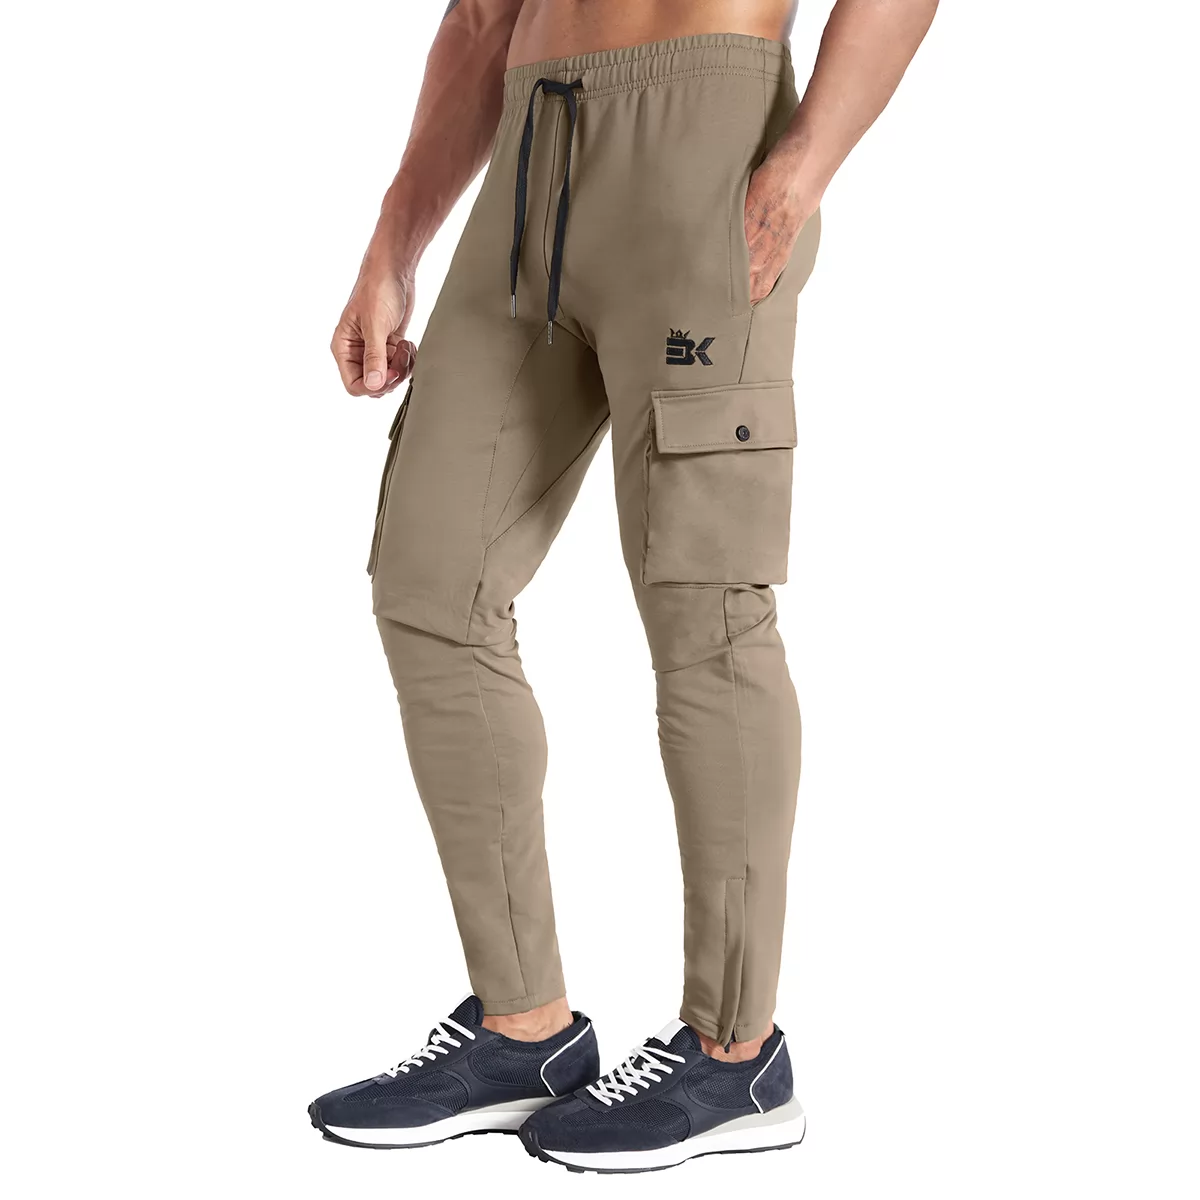 Parlazi Gym Workout Joggers Cargo Pants Sweatpants Tapered Skinny Men Slim  Fit